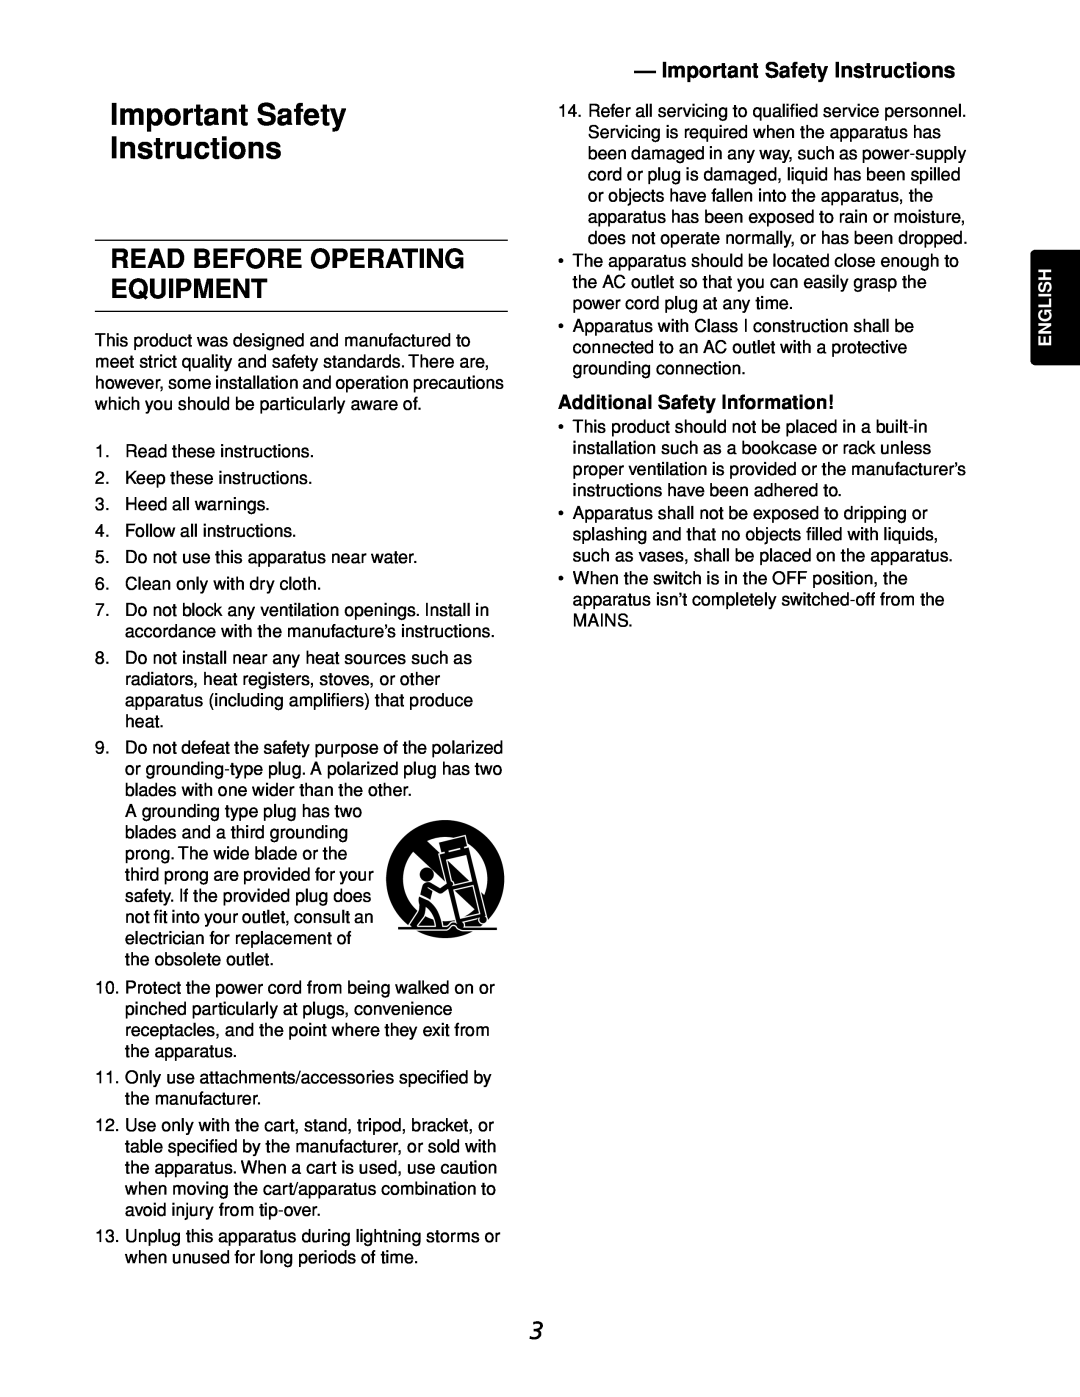 Marantz CDR632 Important Safety Instructions, Read Before Operating Equipment, Additional Safety Information, English 